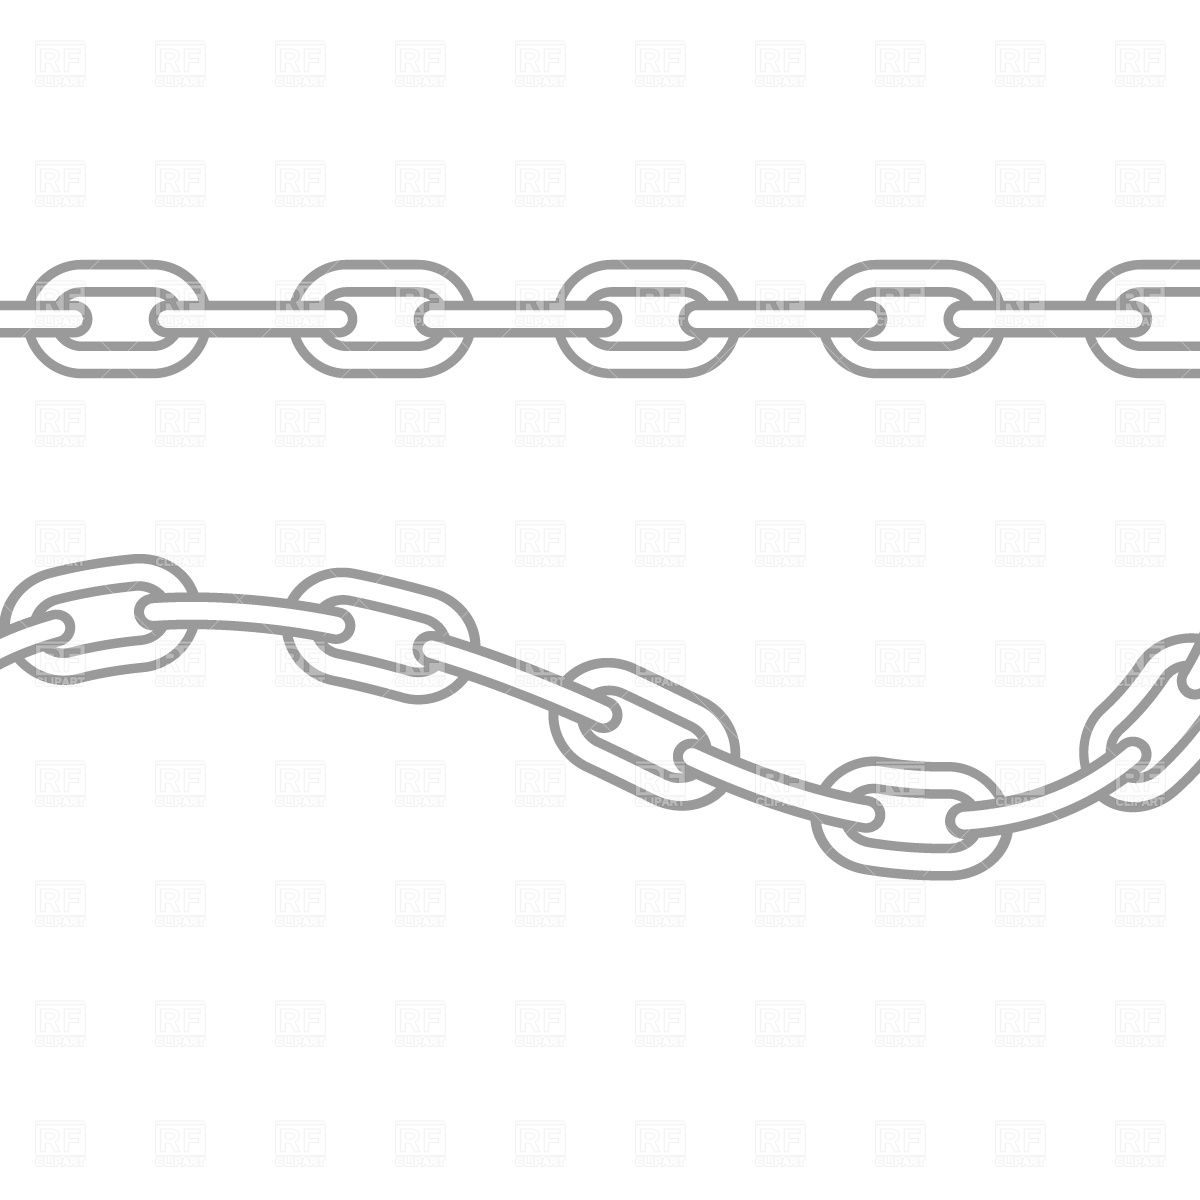 Clipart Catalog   Design Elements   Chain Links Download Royalty Free